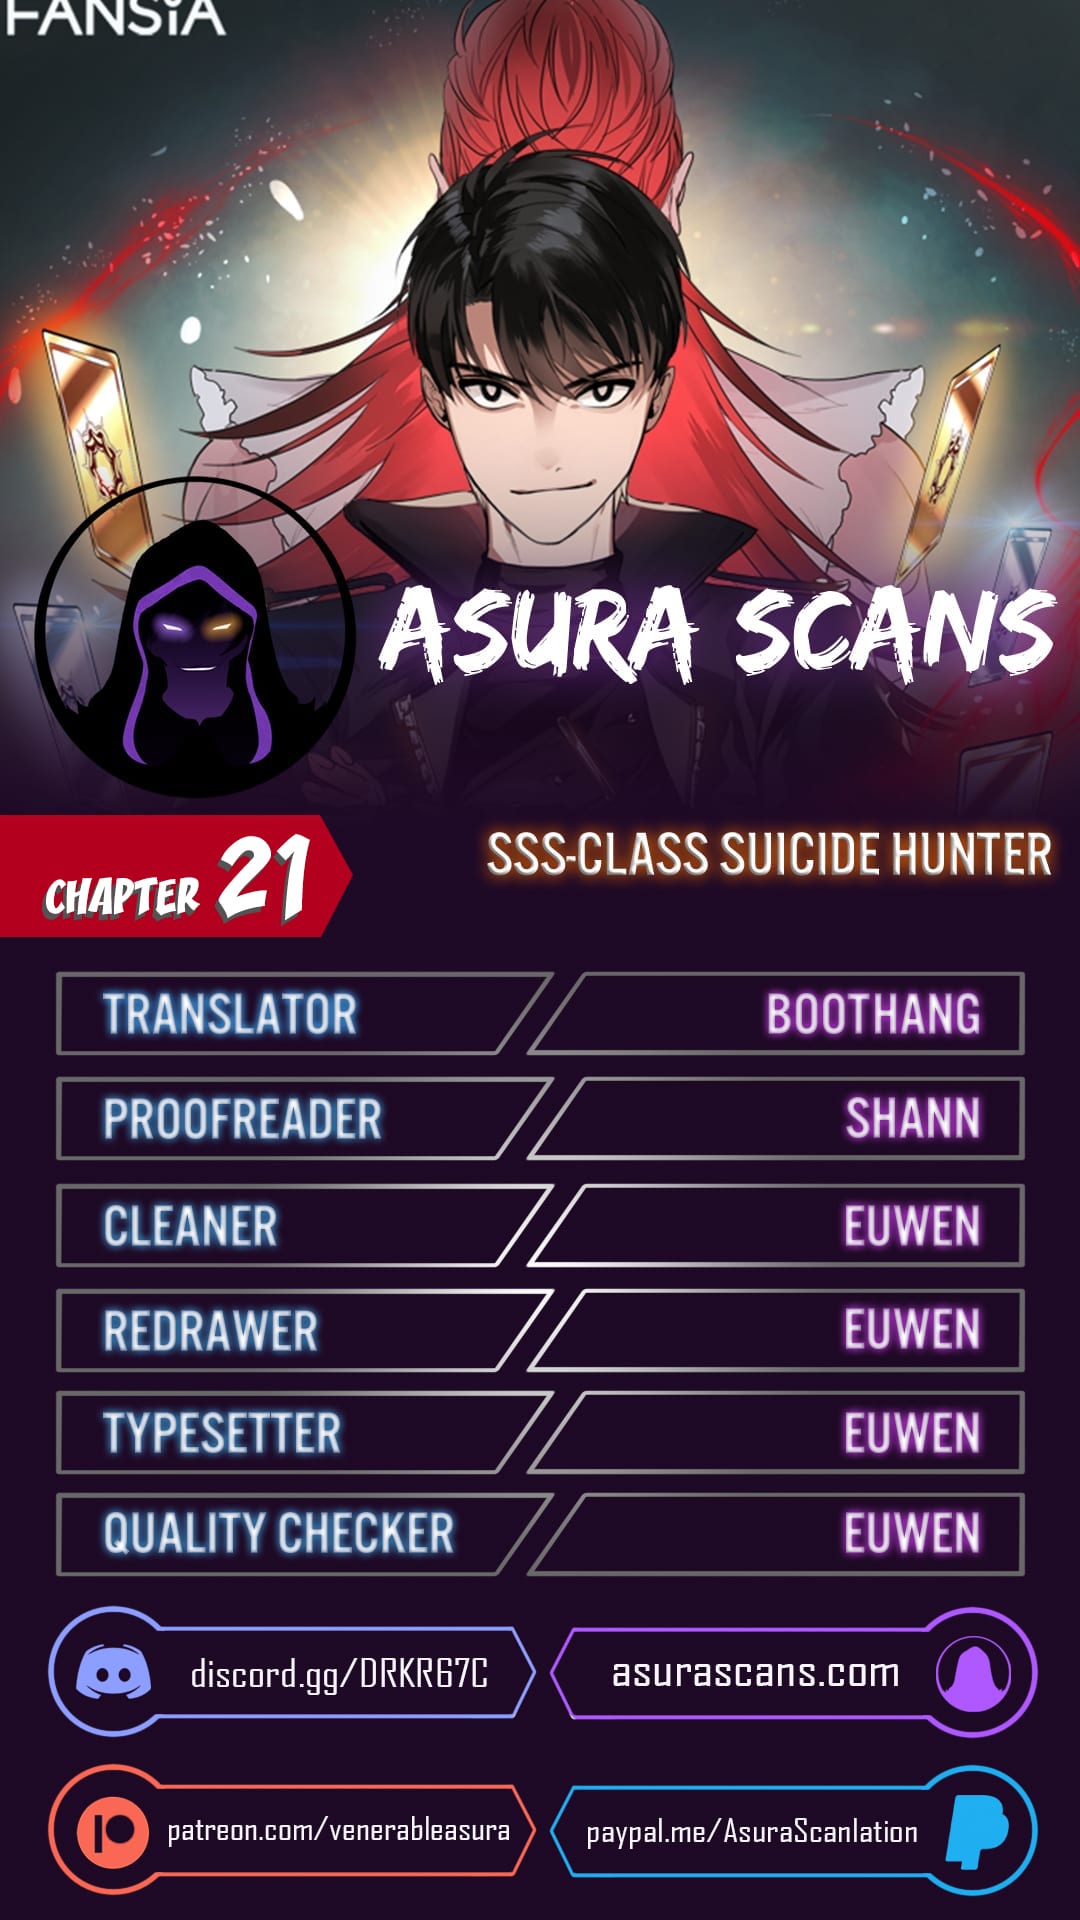 SSS-Class Suicide Hunter chapter 21